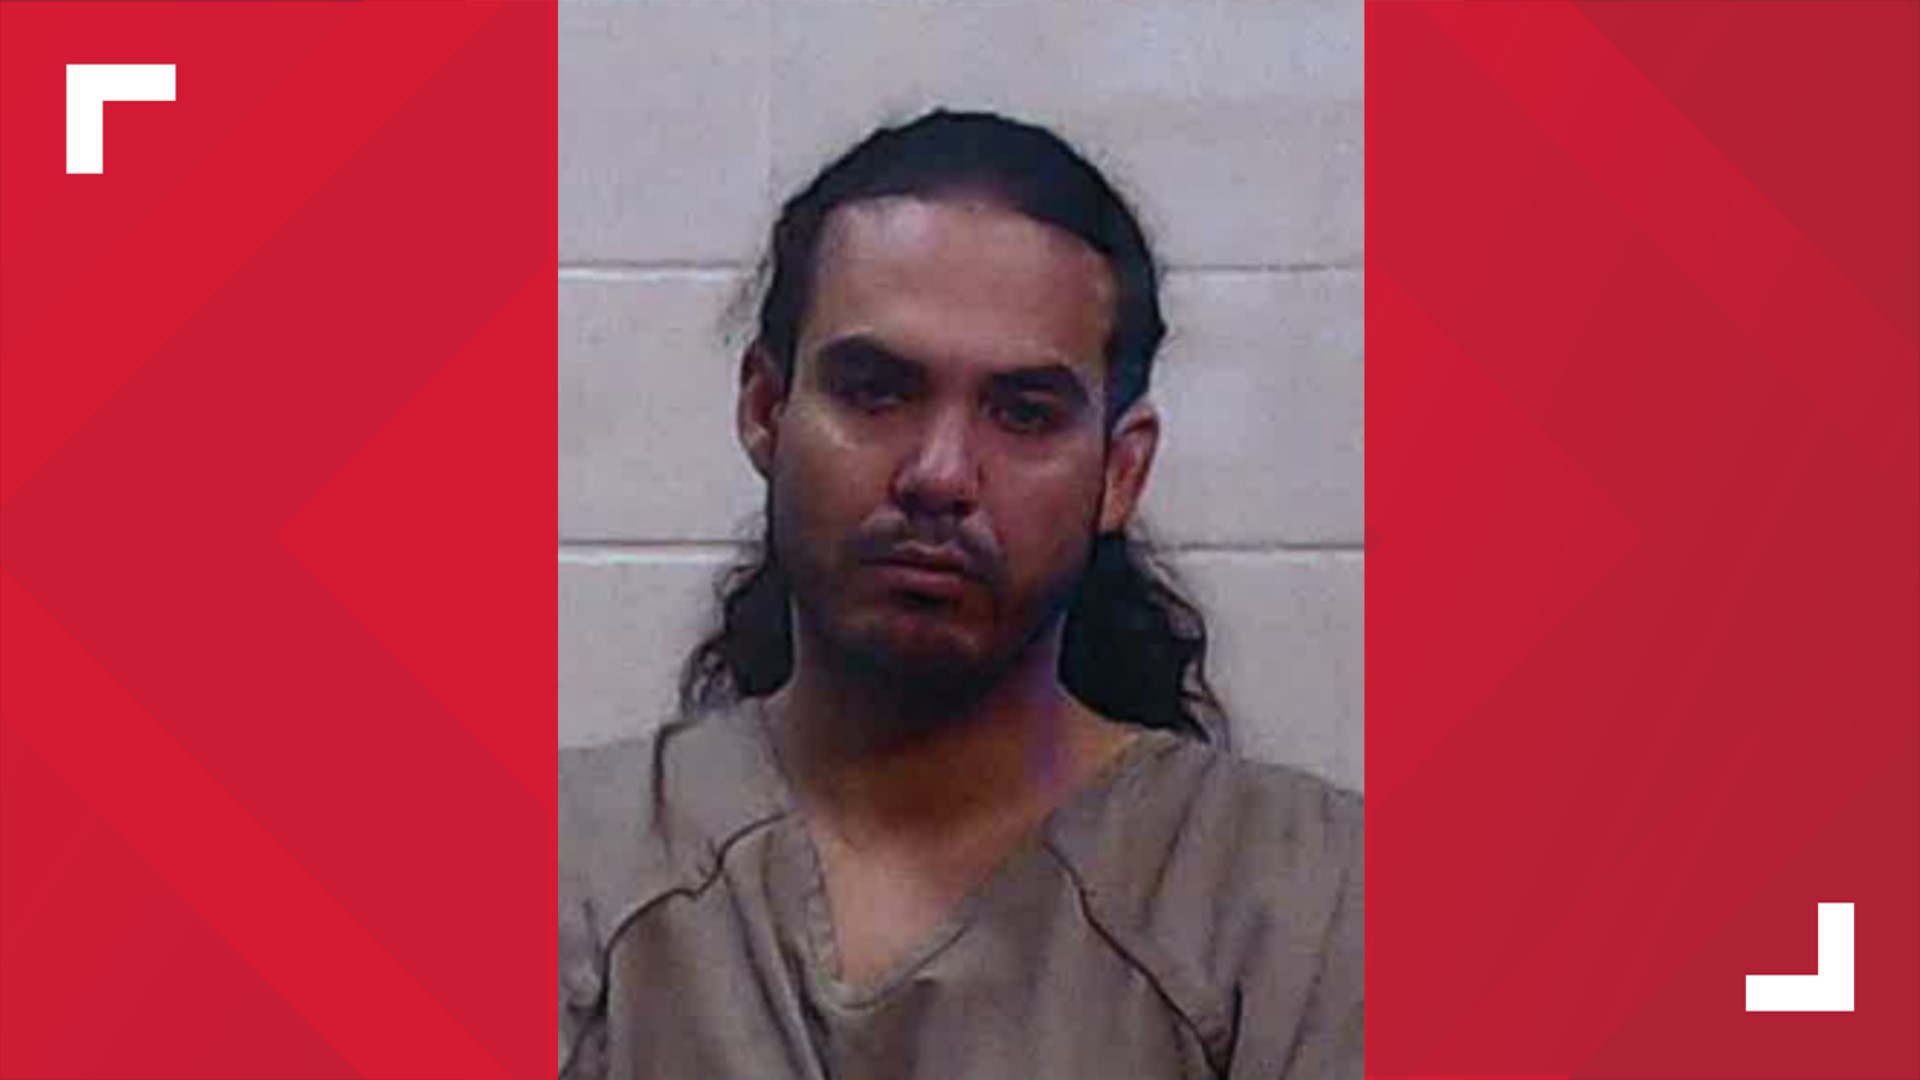 Nathaniel Ochoa, 27, was arrested for aggravated assault with a deadly weapon and an outstanding felony 2 warrant for possession of a controlled substance.